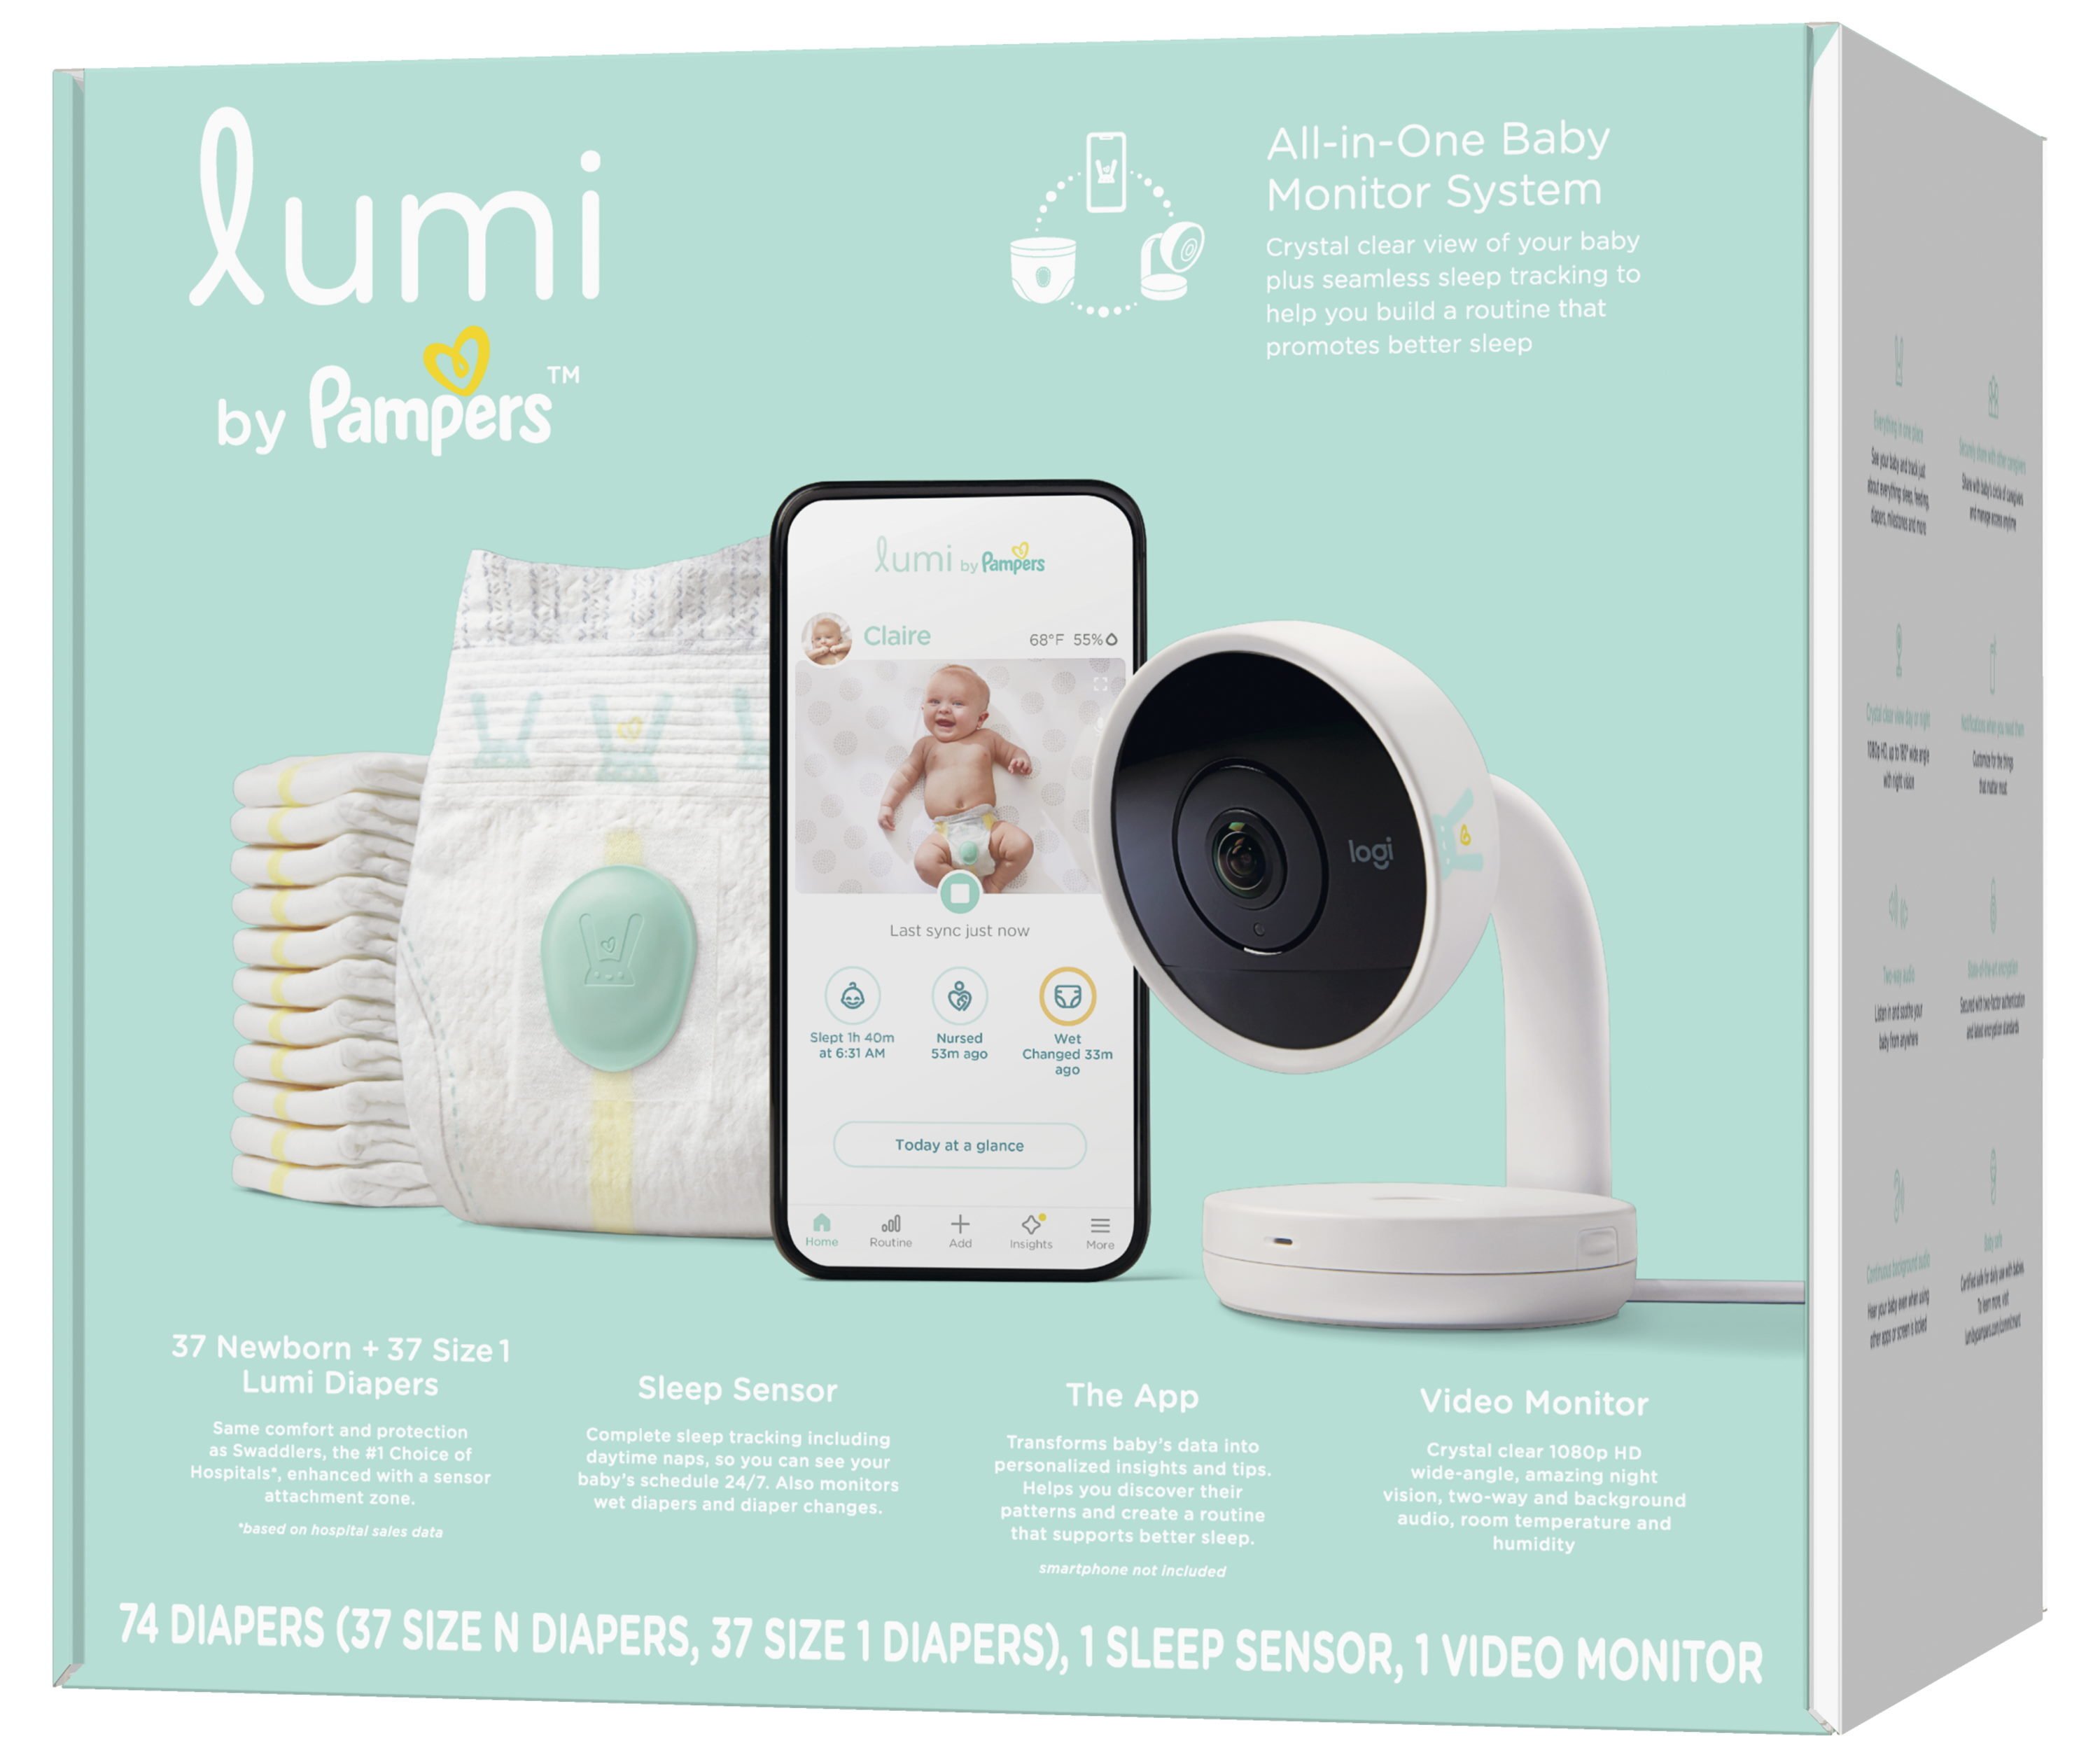 lumi by pampers